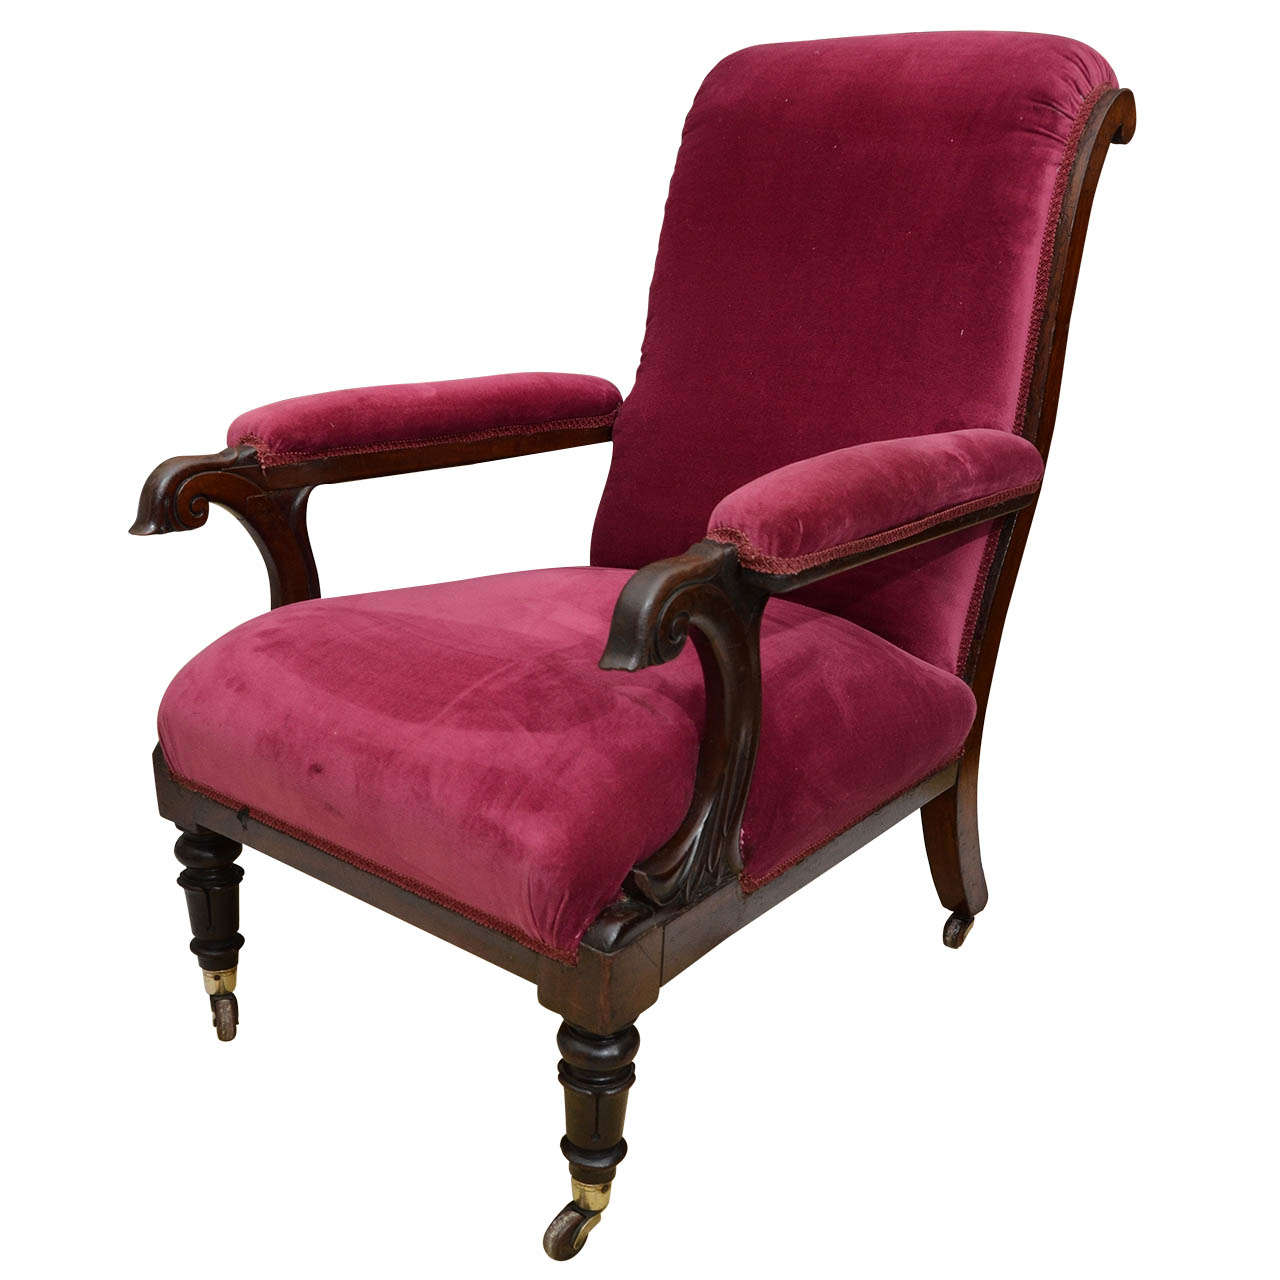 English Mahogany Framed Open Arm Chair Cr. 1830-40 For Sale